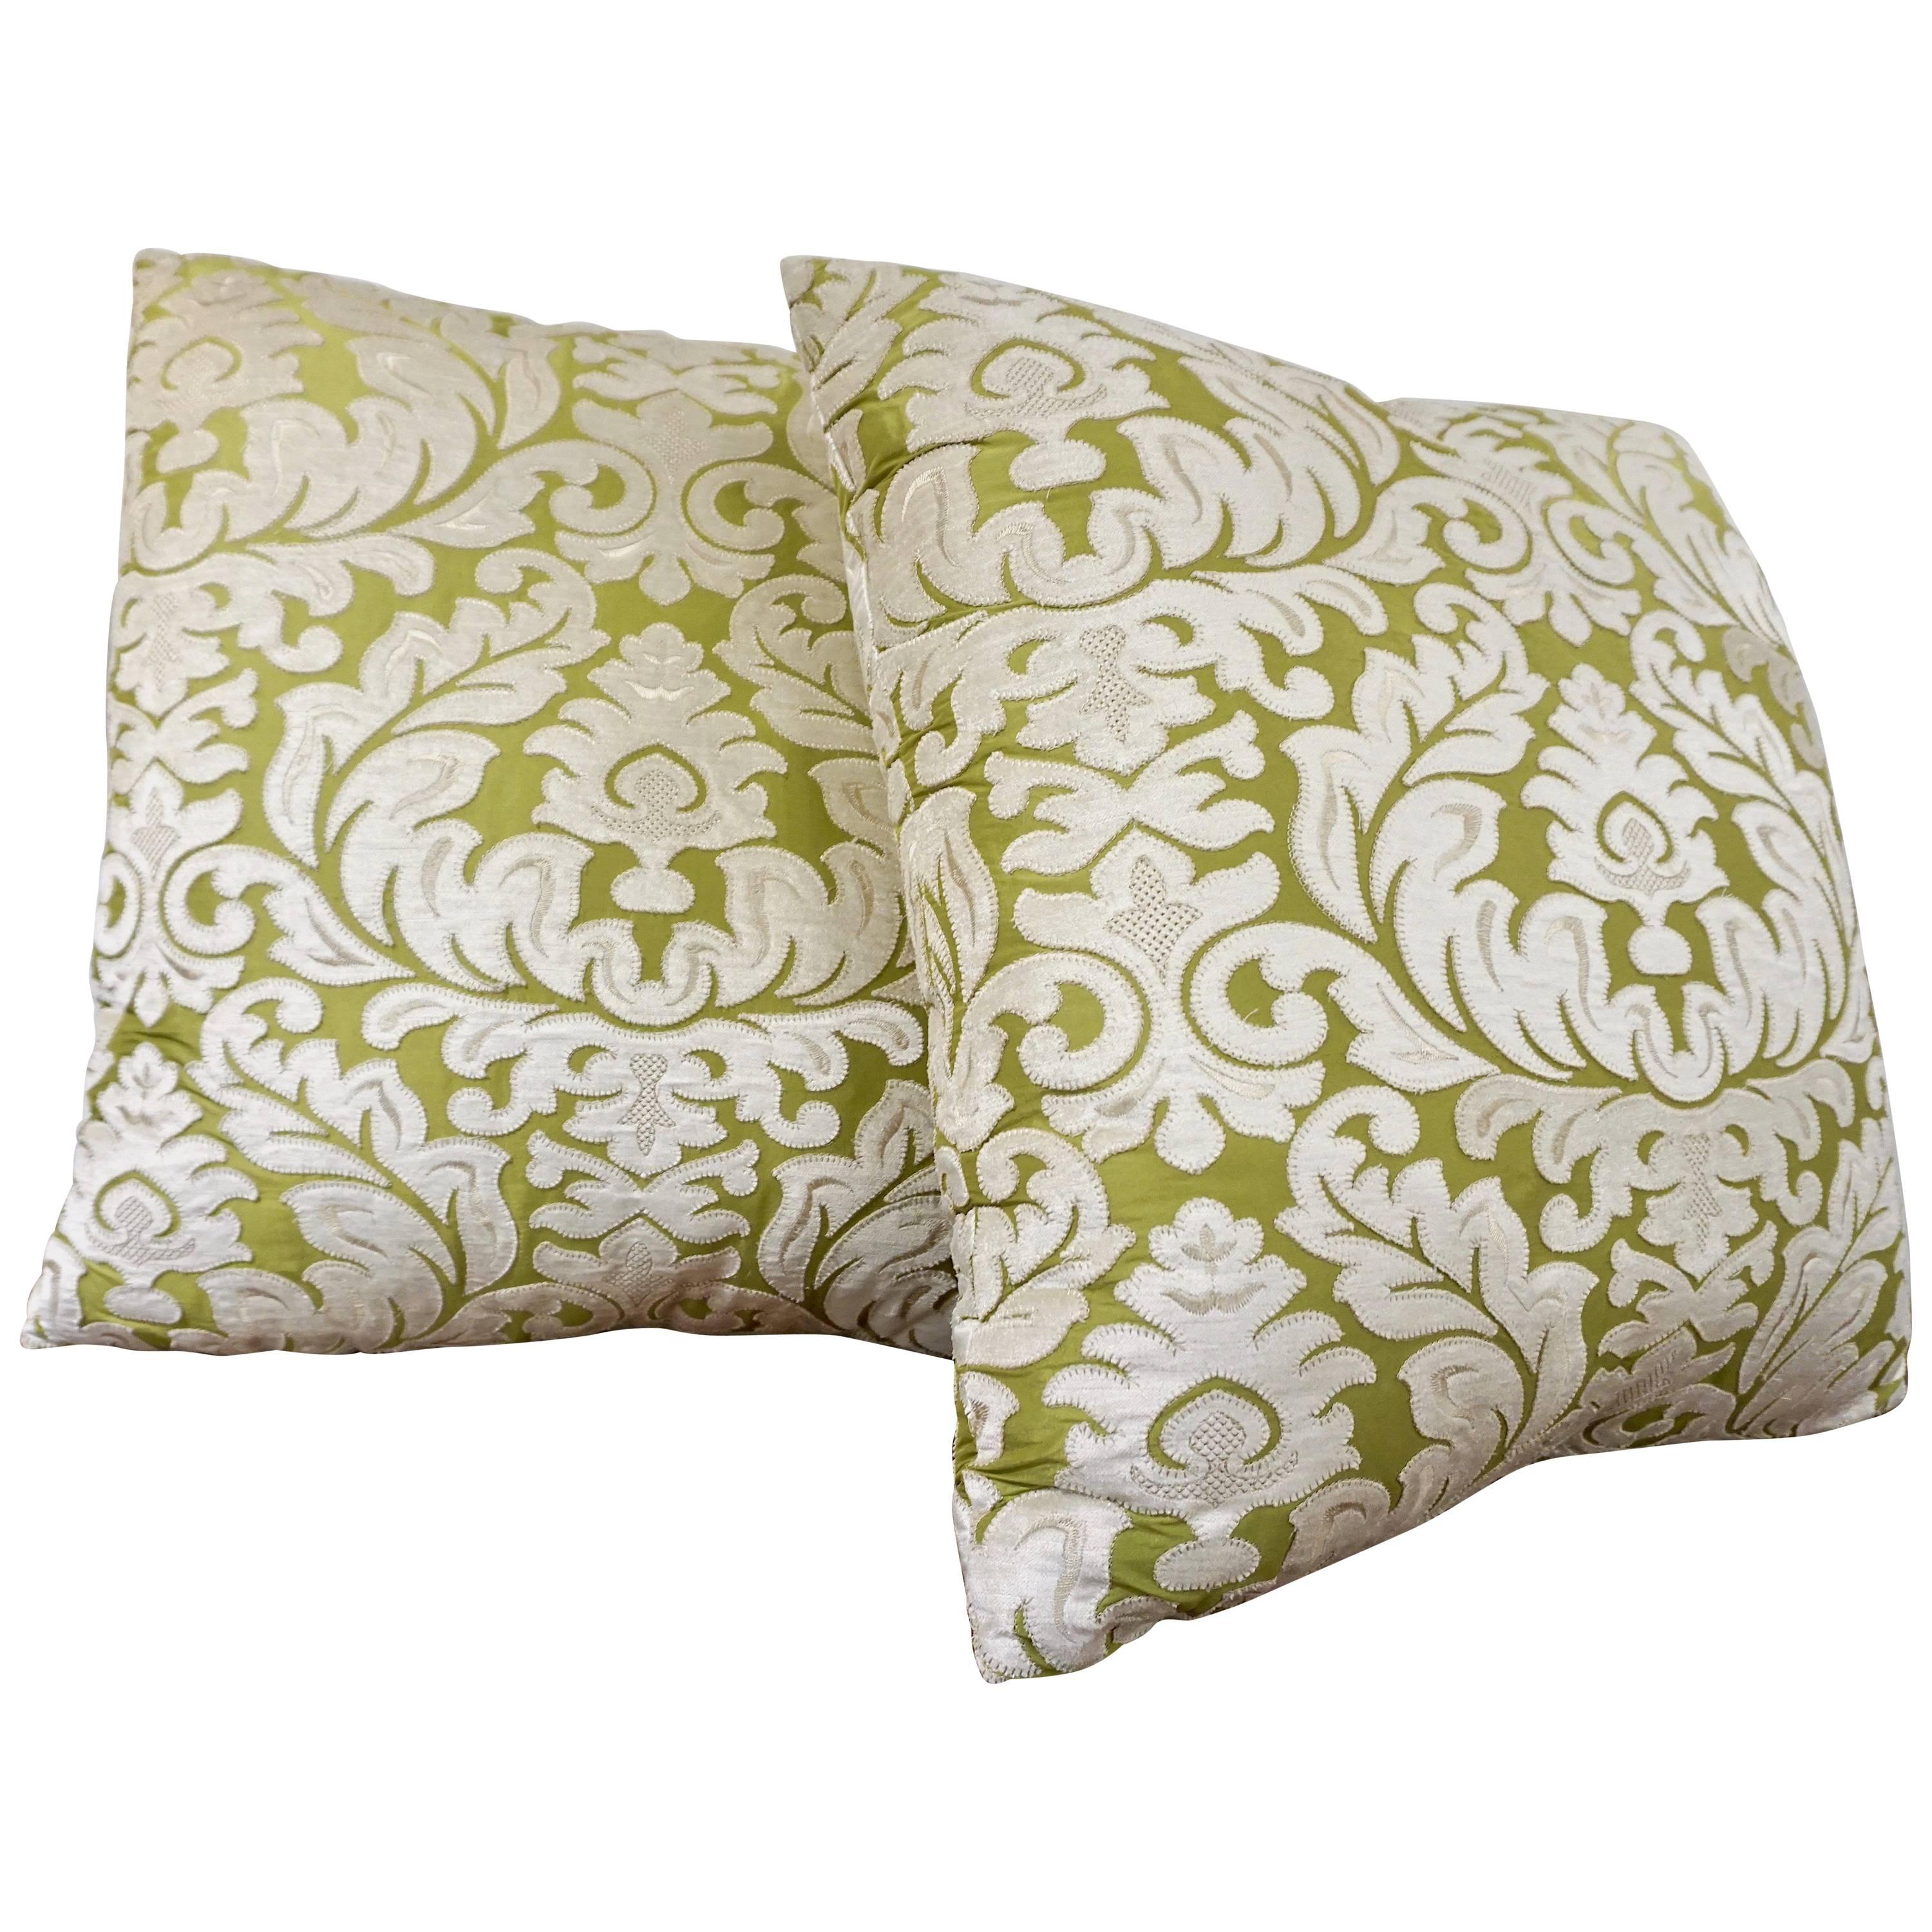 Contemporary French Green and Ivory White Damask Velvet Throw Pillows